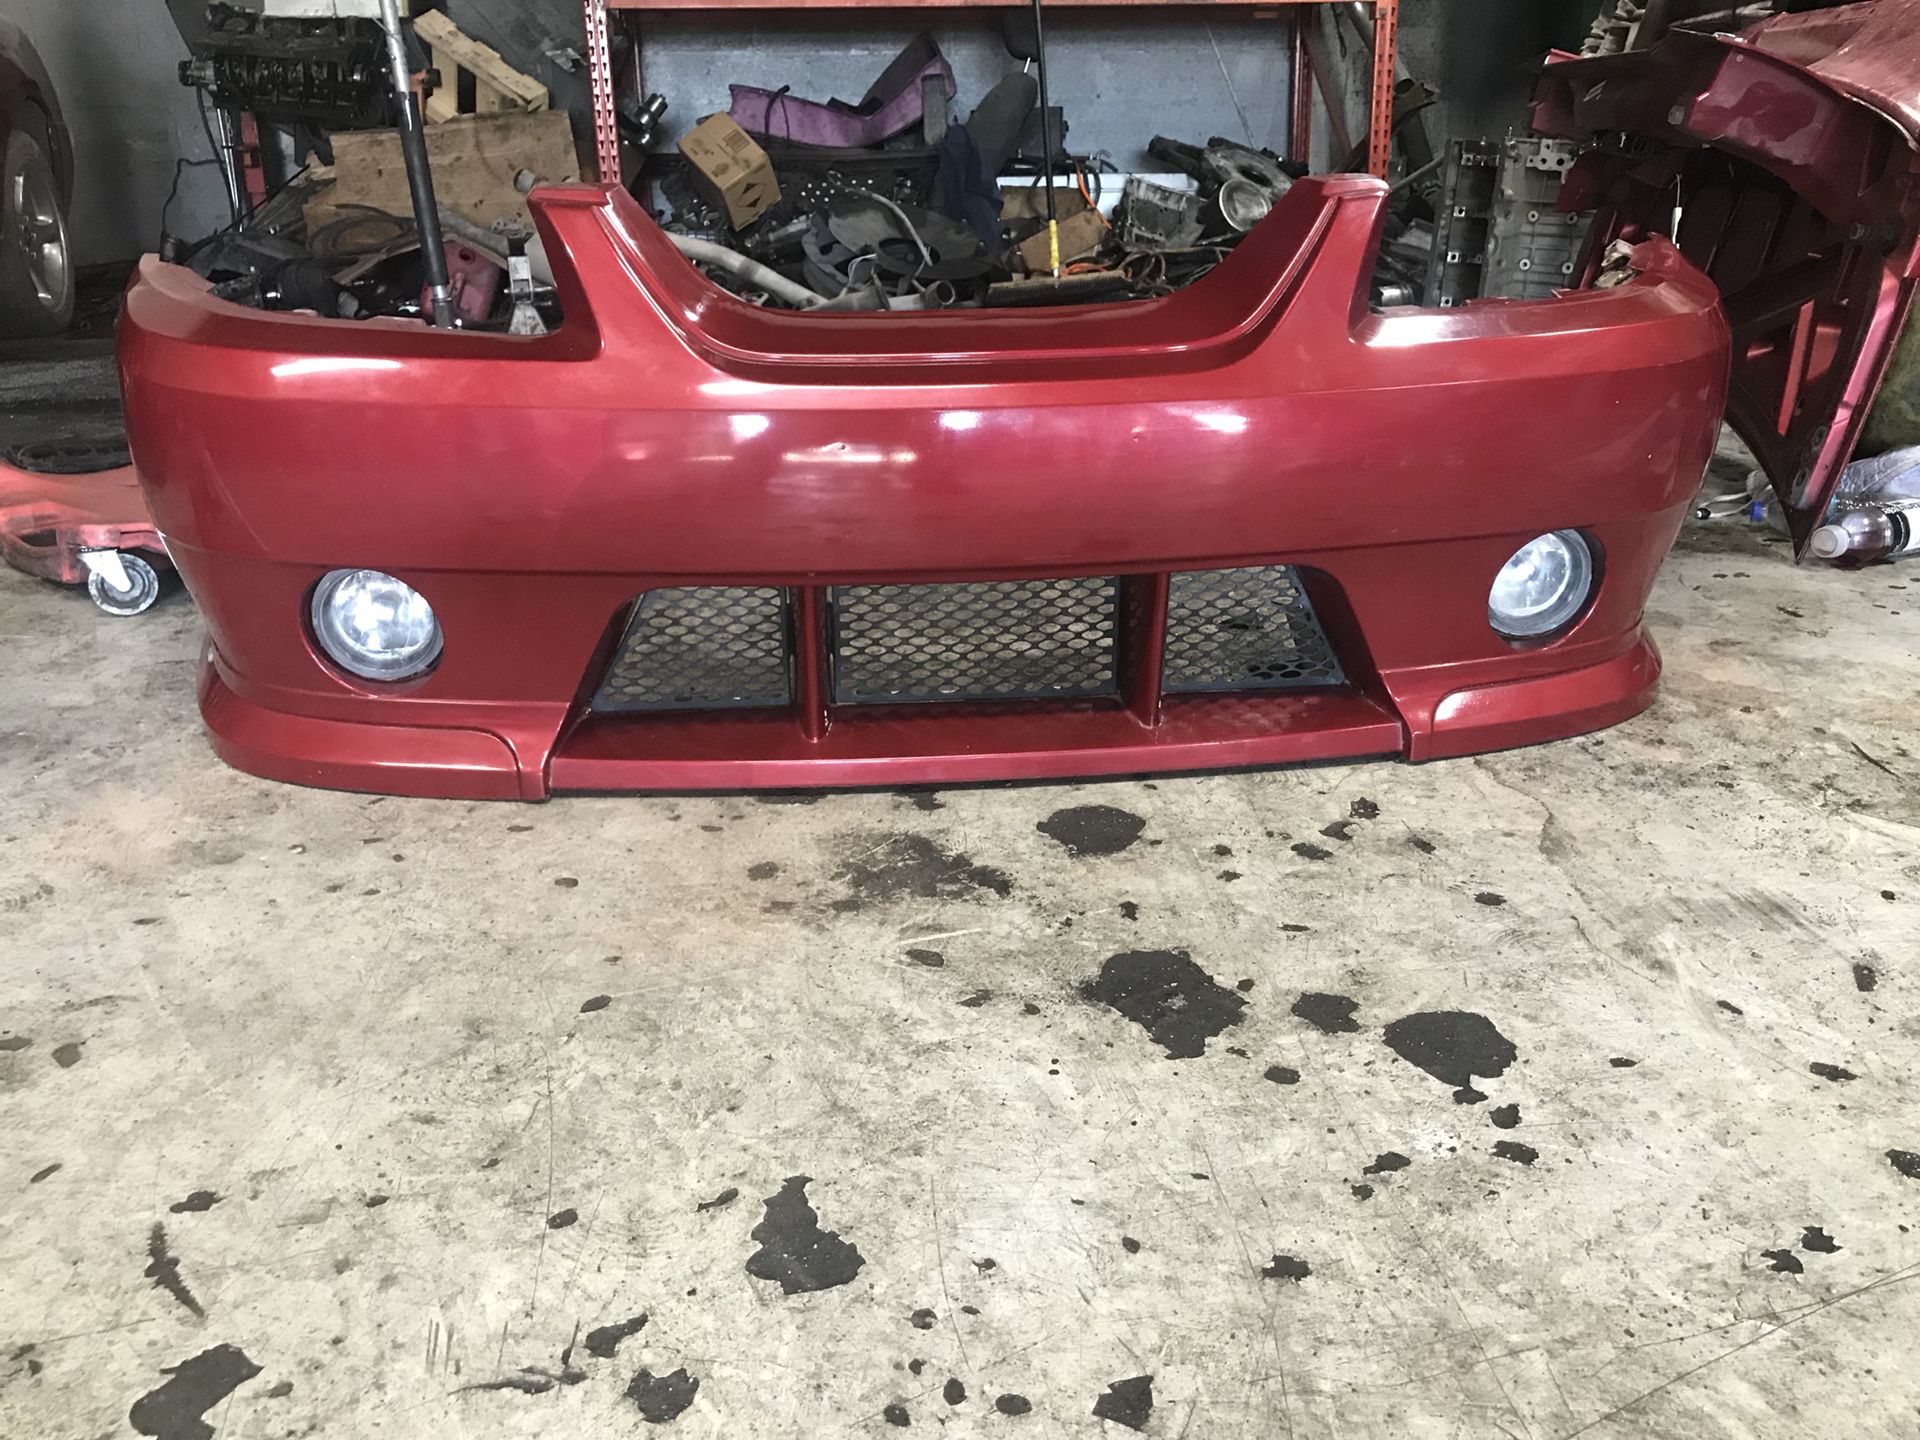 99-04 Mustang Roush stage 3 front bumper